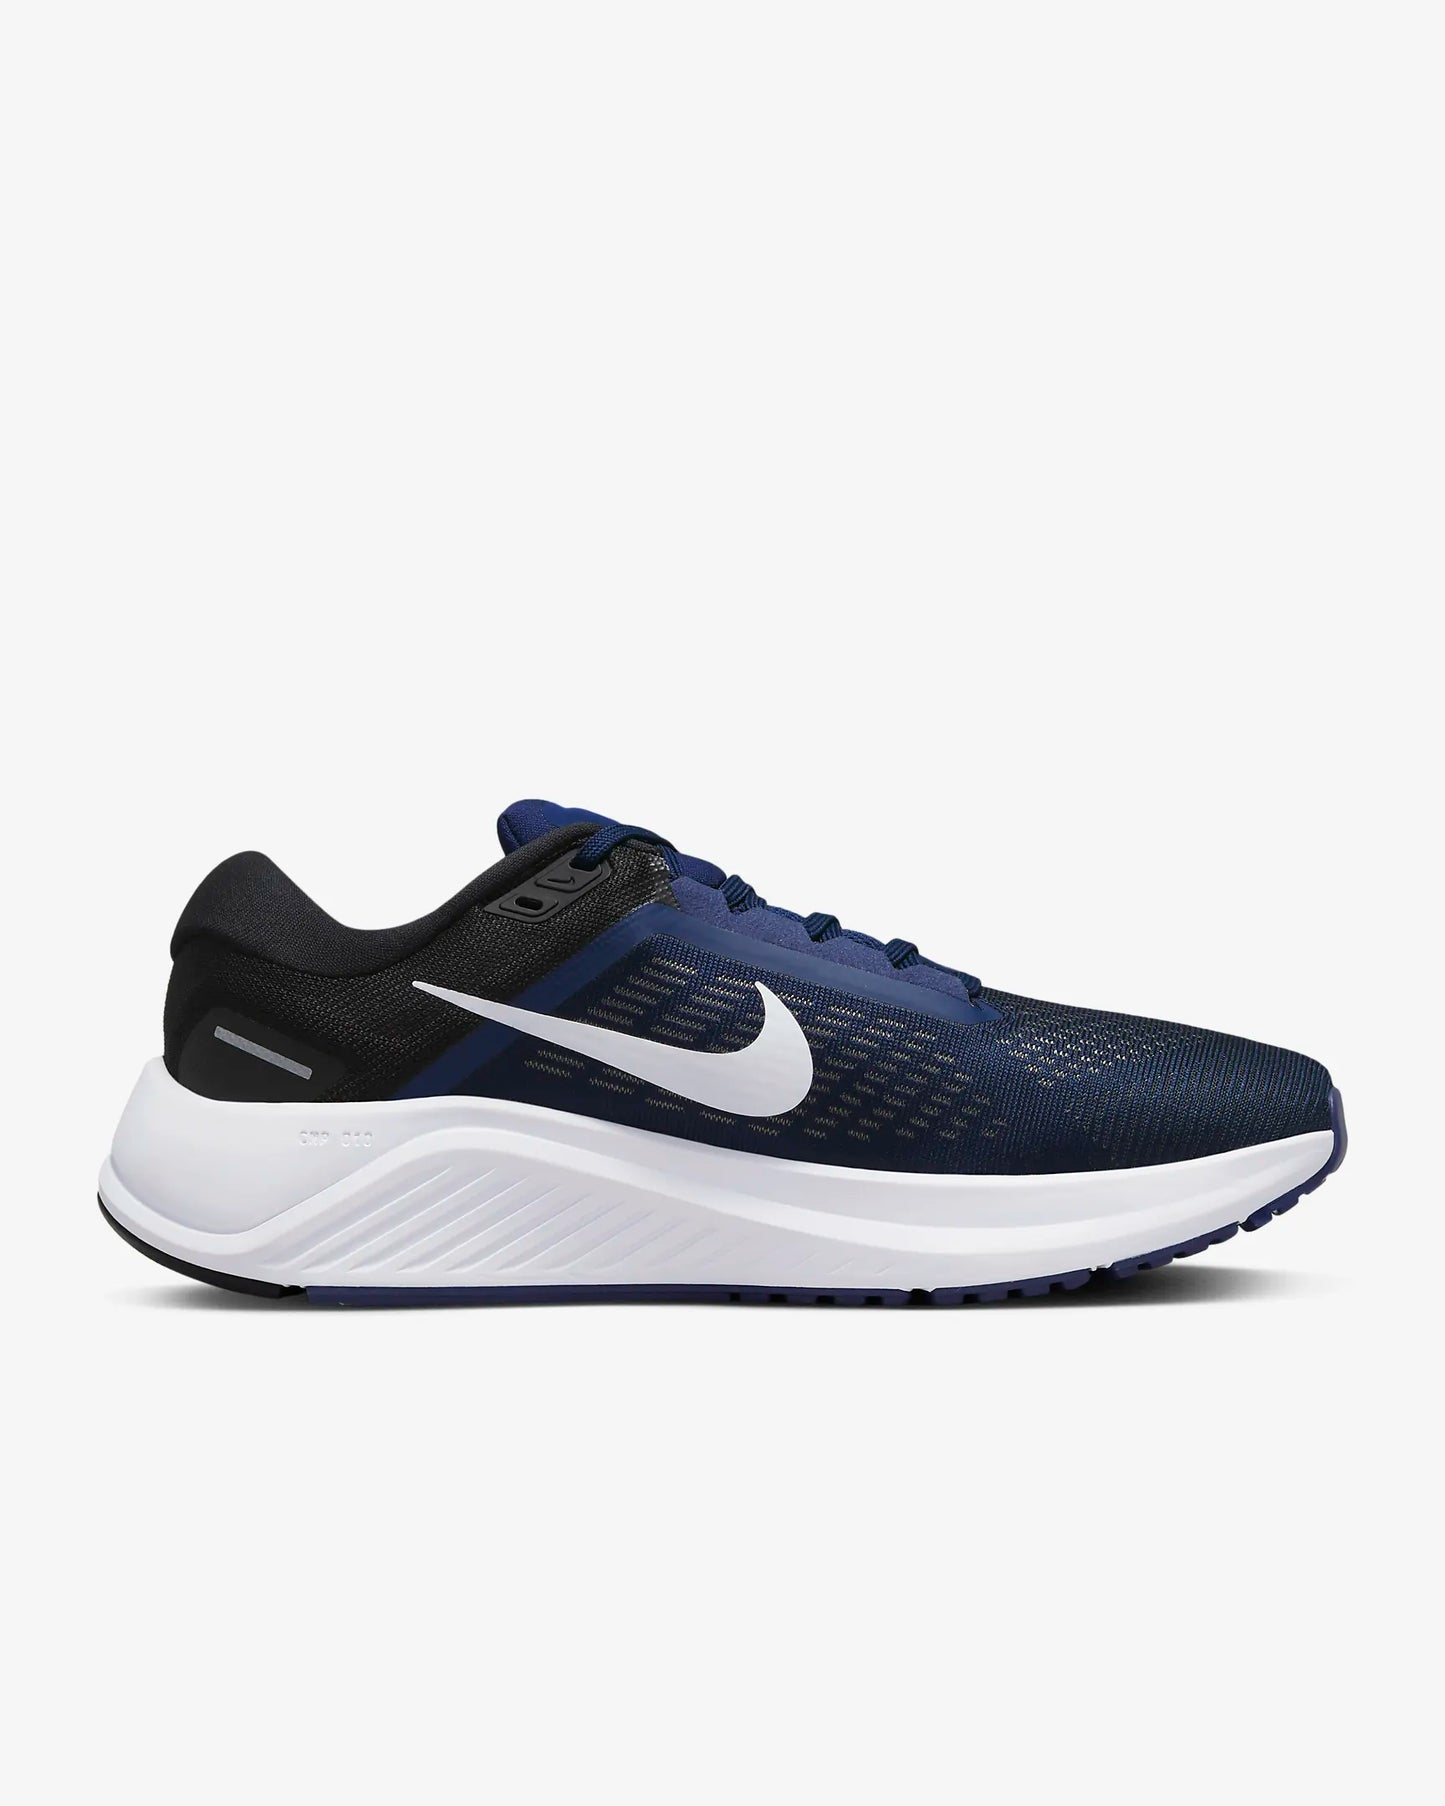 Nike Men's Structure 24 Road Running Shoes, Midnight Navy/Black/White/White